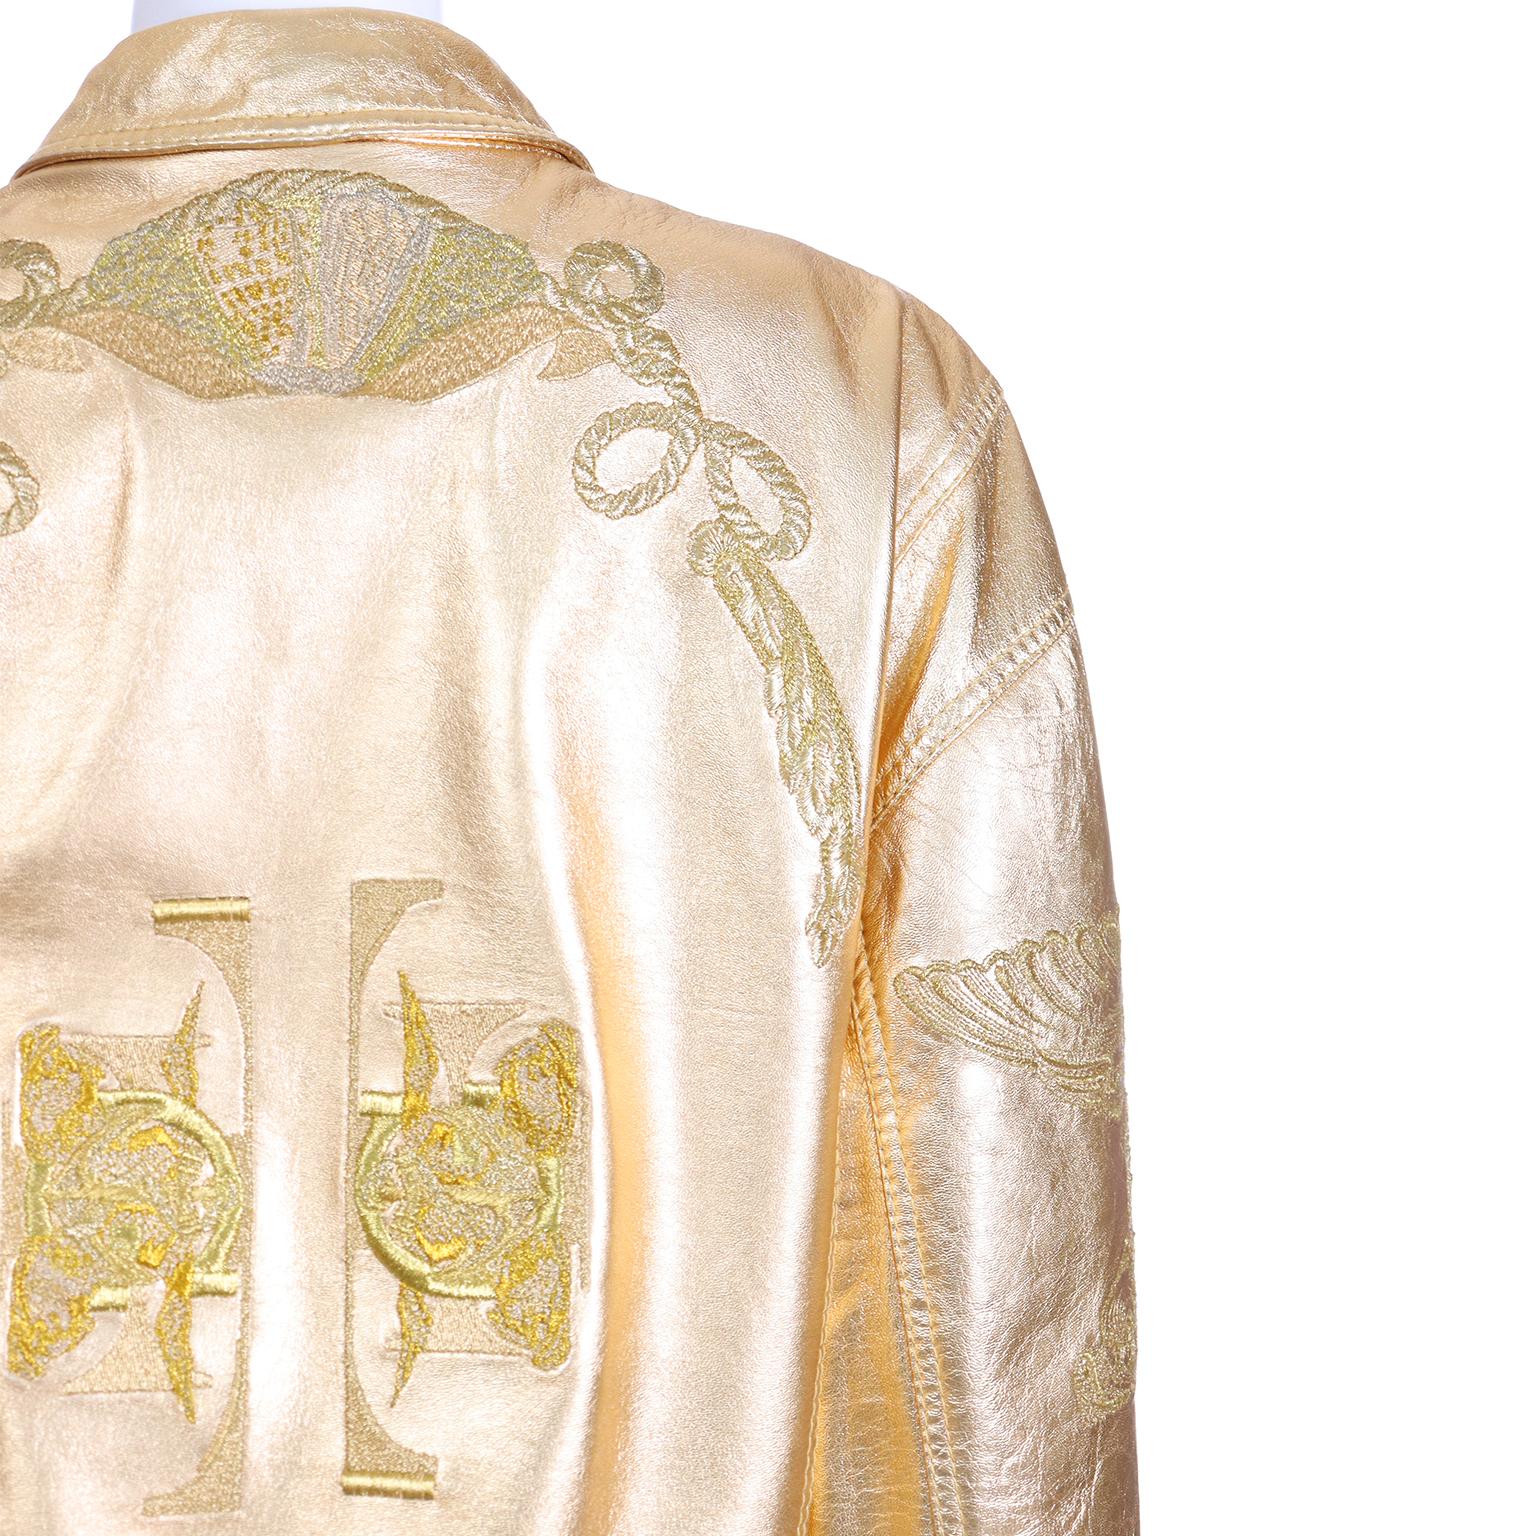 Gianfranco Ferre S/S 1992 Runway Gold Leather Embroidered Ocean Theme Jacket For Sale 3